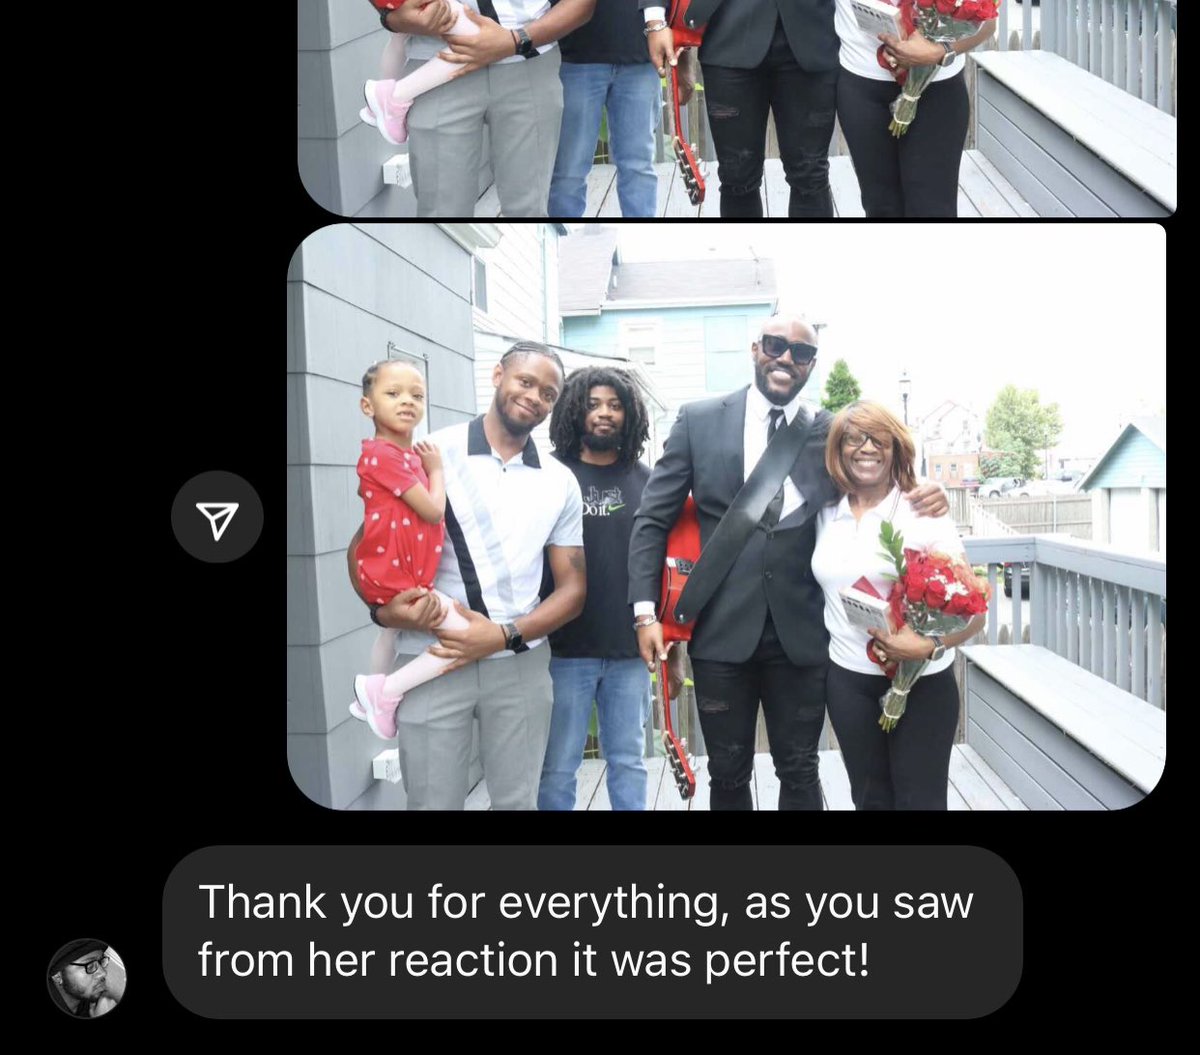 ⭐️ ⭐️⭐️⭐️⭐️ #ClientReviews to make it all better. 
•
Making special moments is what it is all about. J TELEGRAMS, a Luxurious Experience. 
Dm your city & state for a quote today! 
•
#LuxuryMelodies #OpulentSerenade #GlamorousVocals
#ExtravagantHarmony